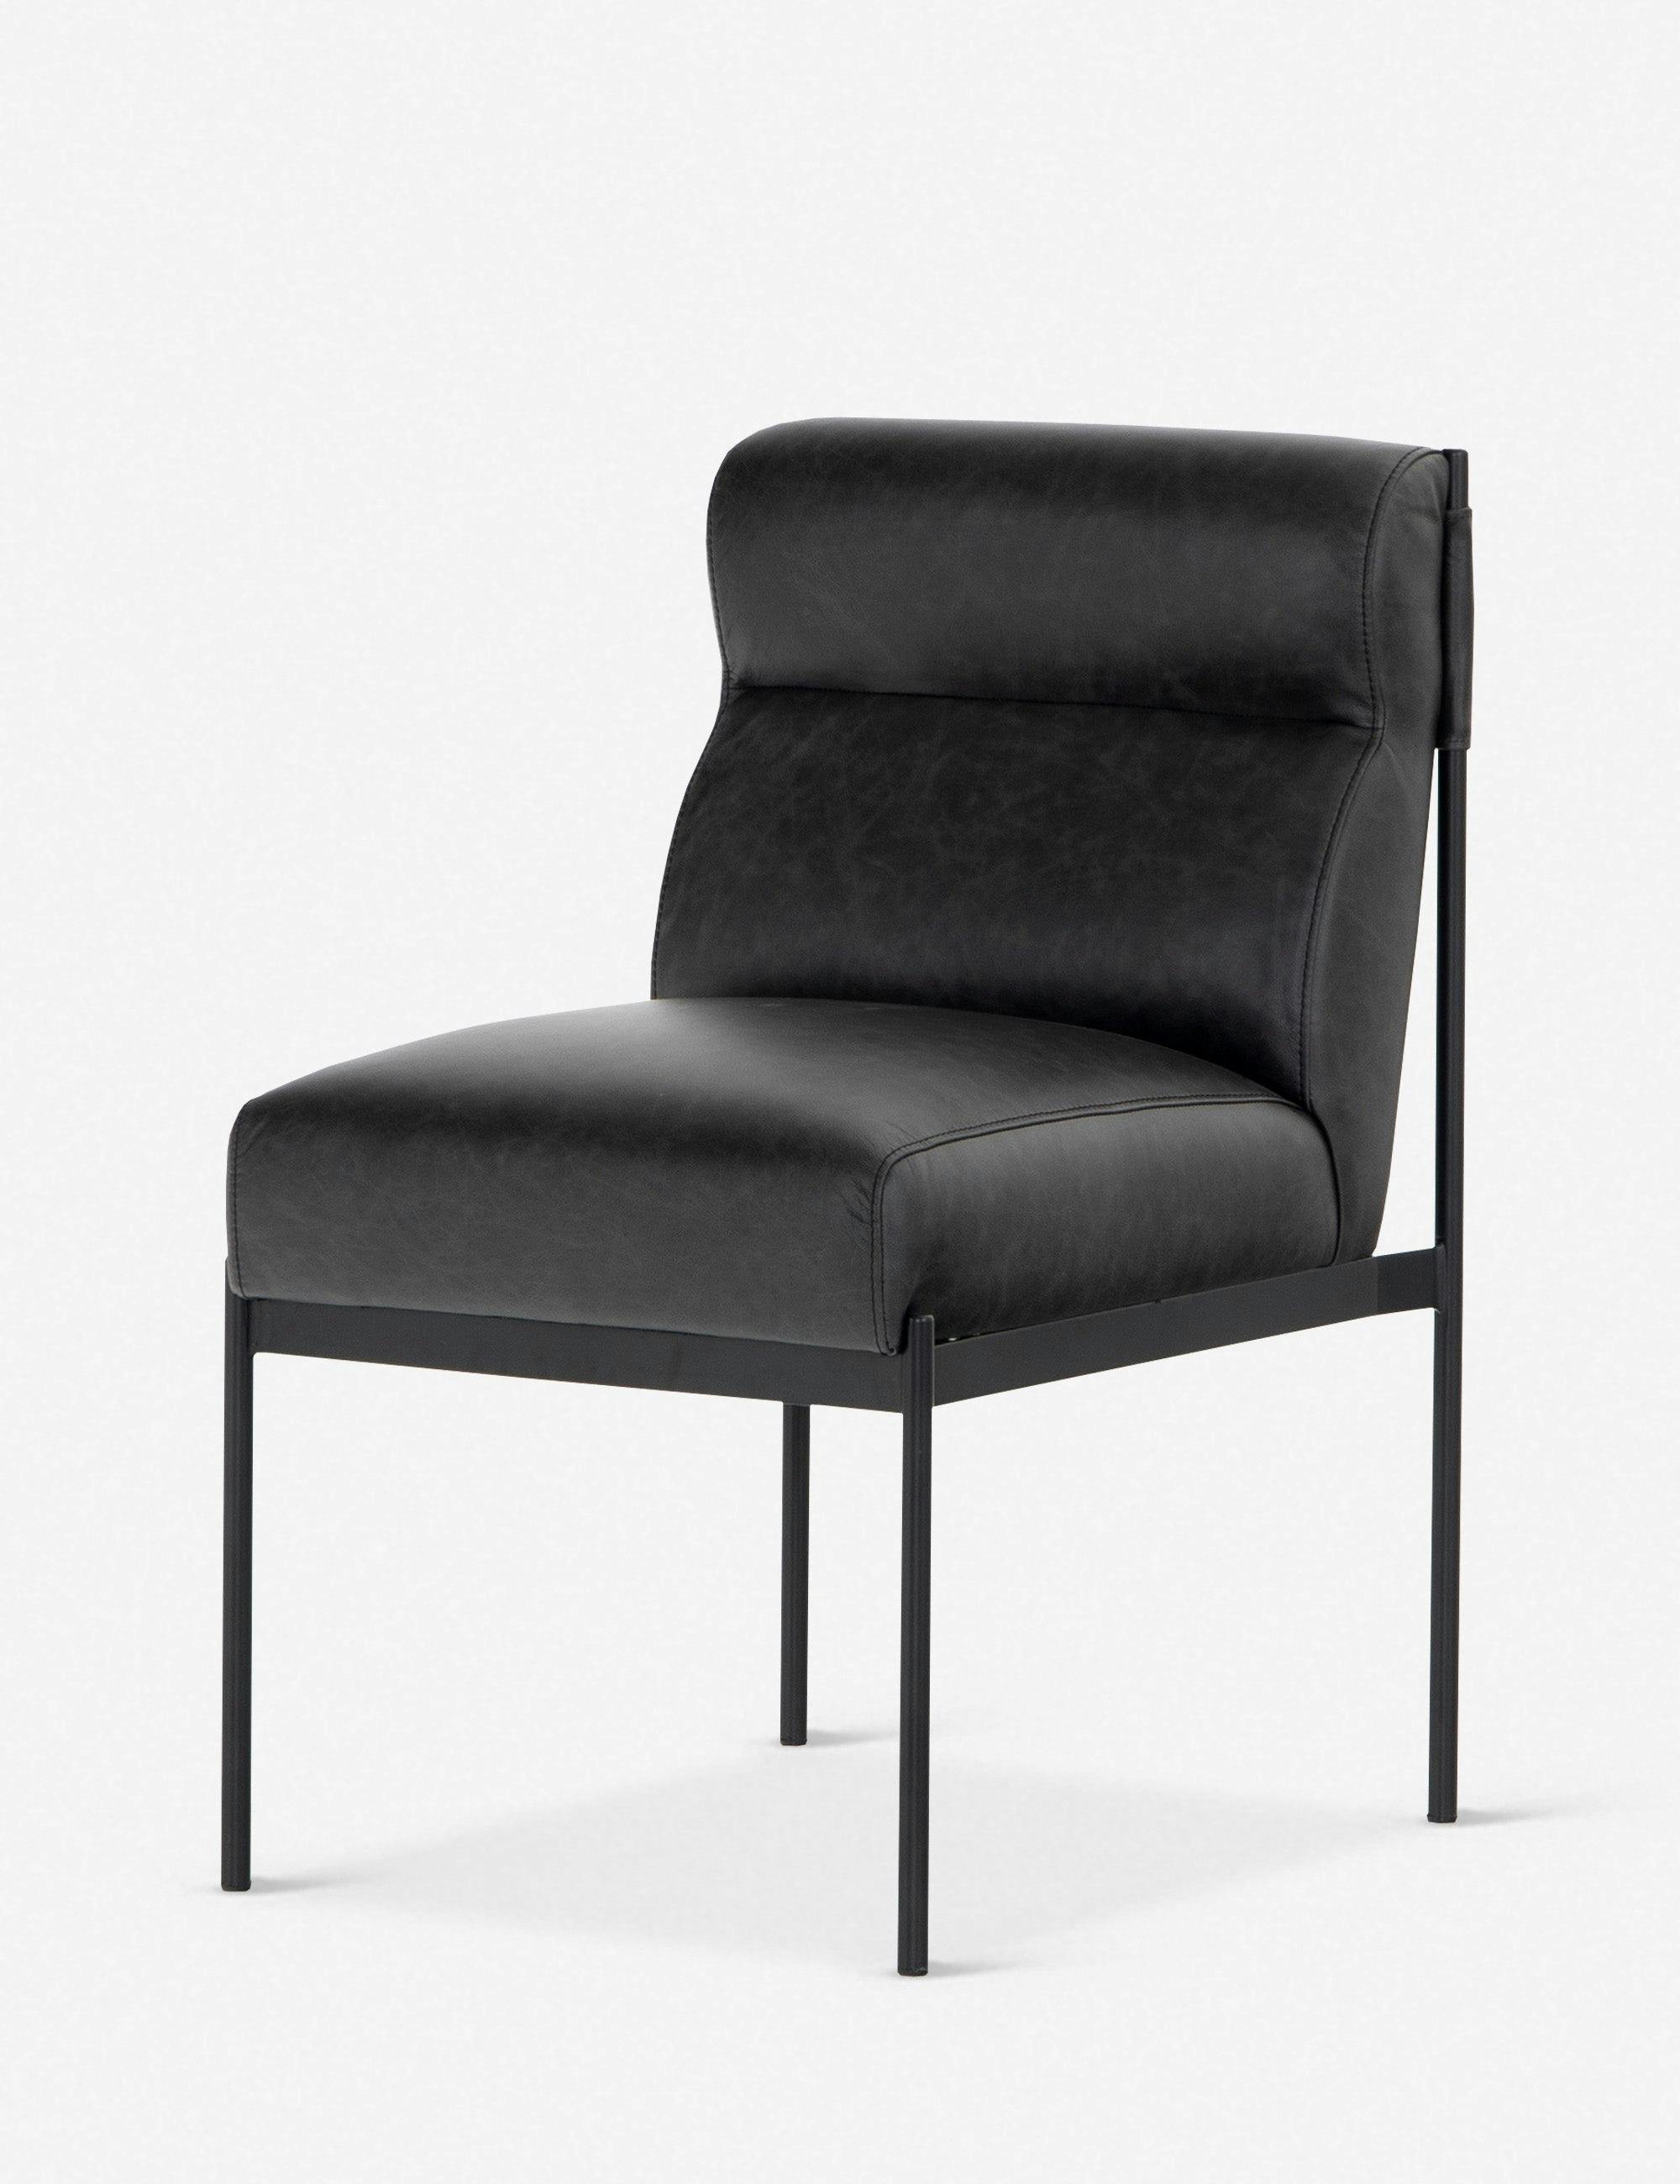 Sleek Black Top-Grain Leather Upholstered Side Chair with Metal Frame